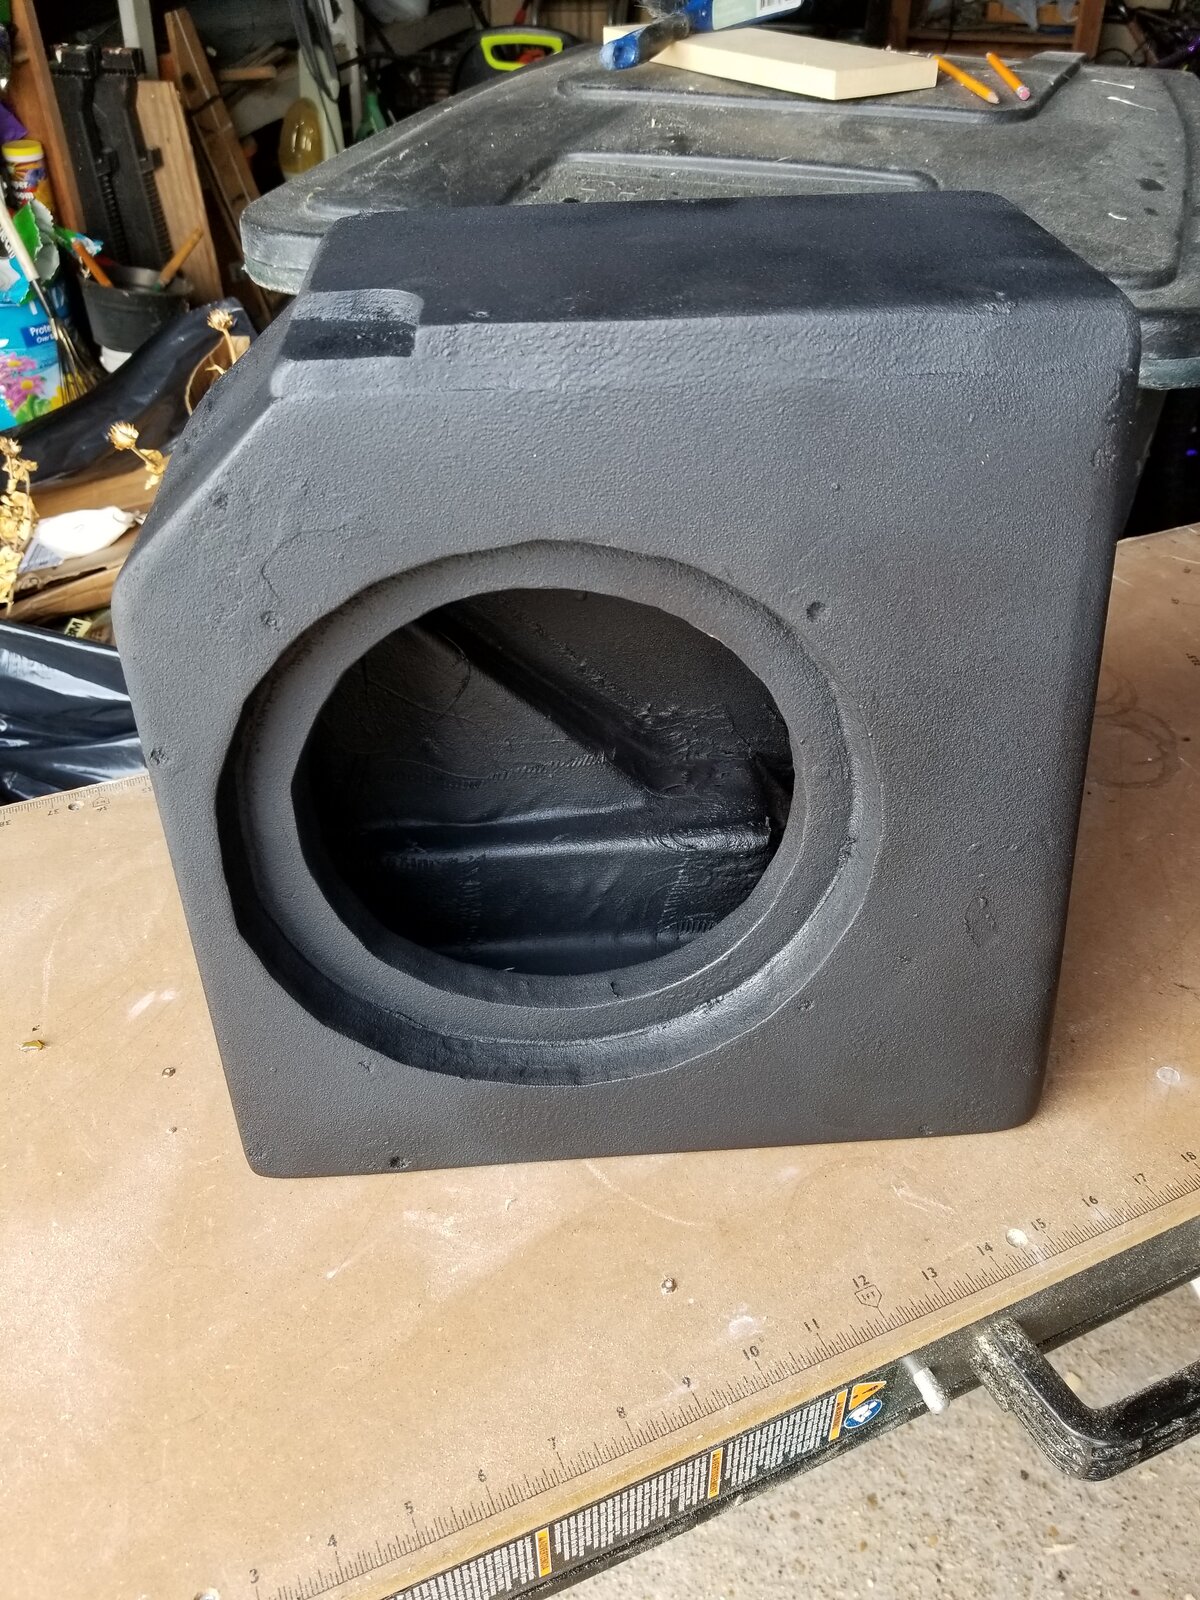 Whats the go to subwoofer and amp for the center console? | Jeep Wrangler TJ  Forum